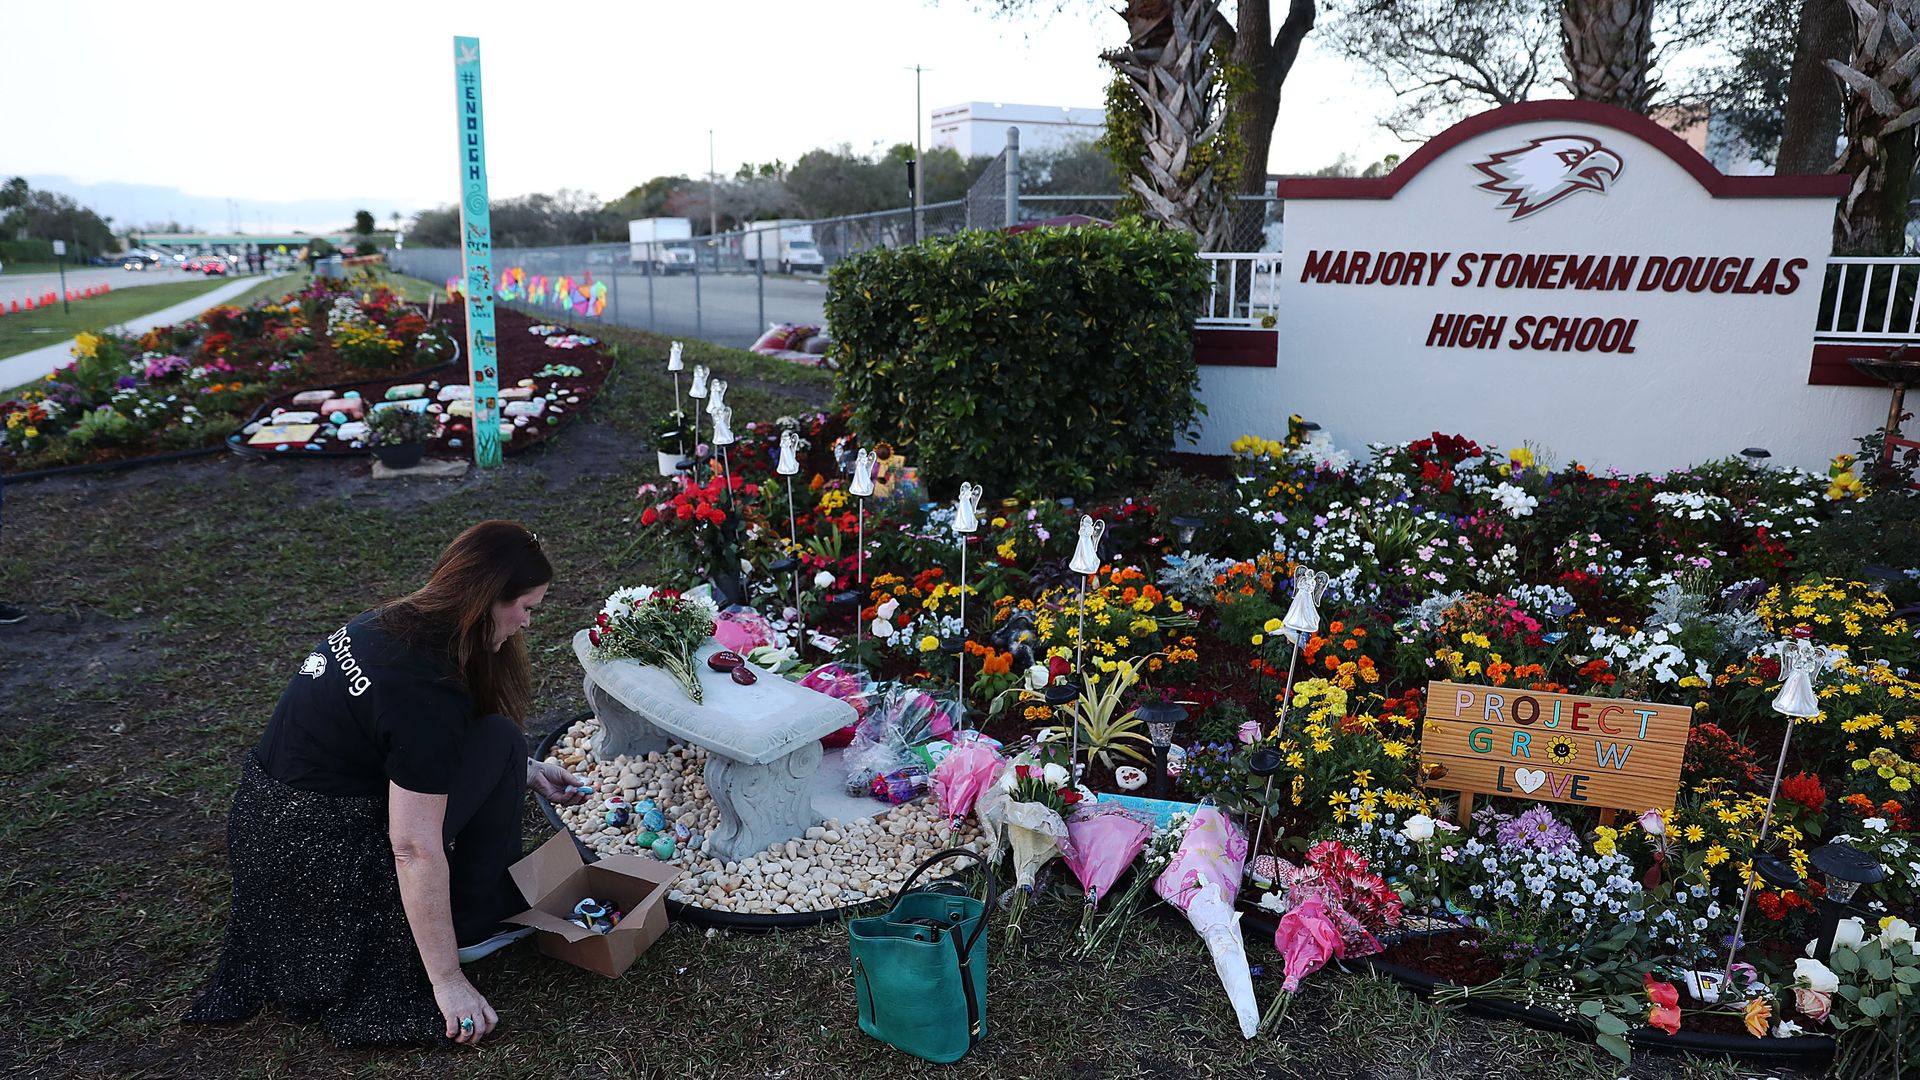 This image shows a large memorial of flowers and plaques underneath the Stoneman Douglas High School welcome sign.